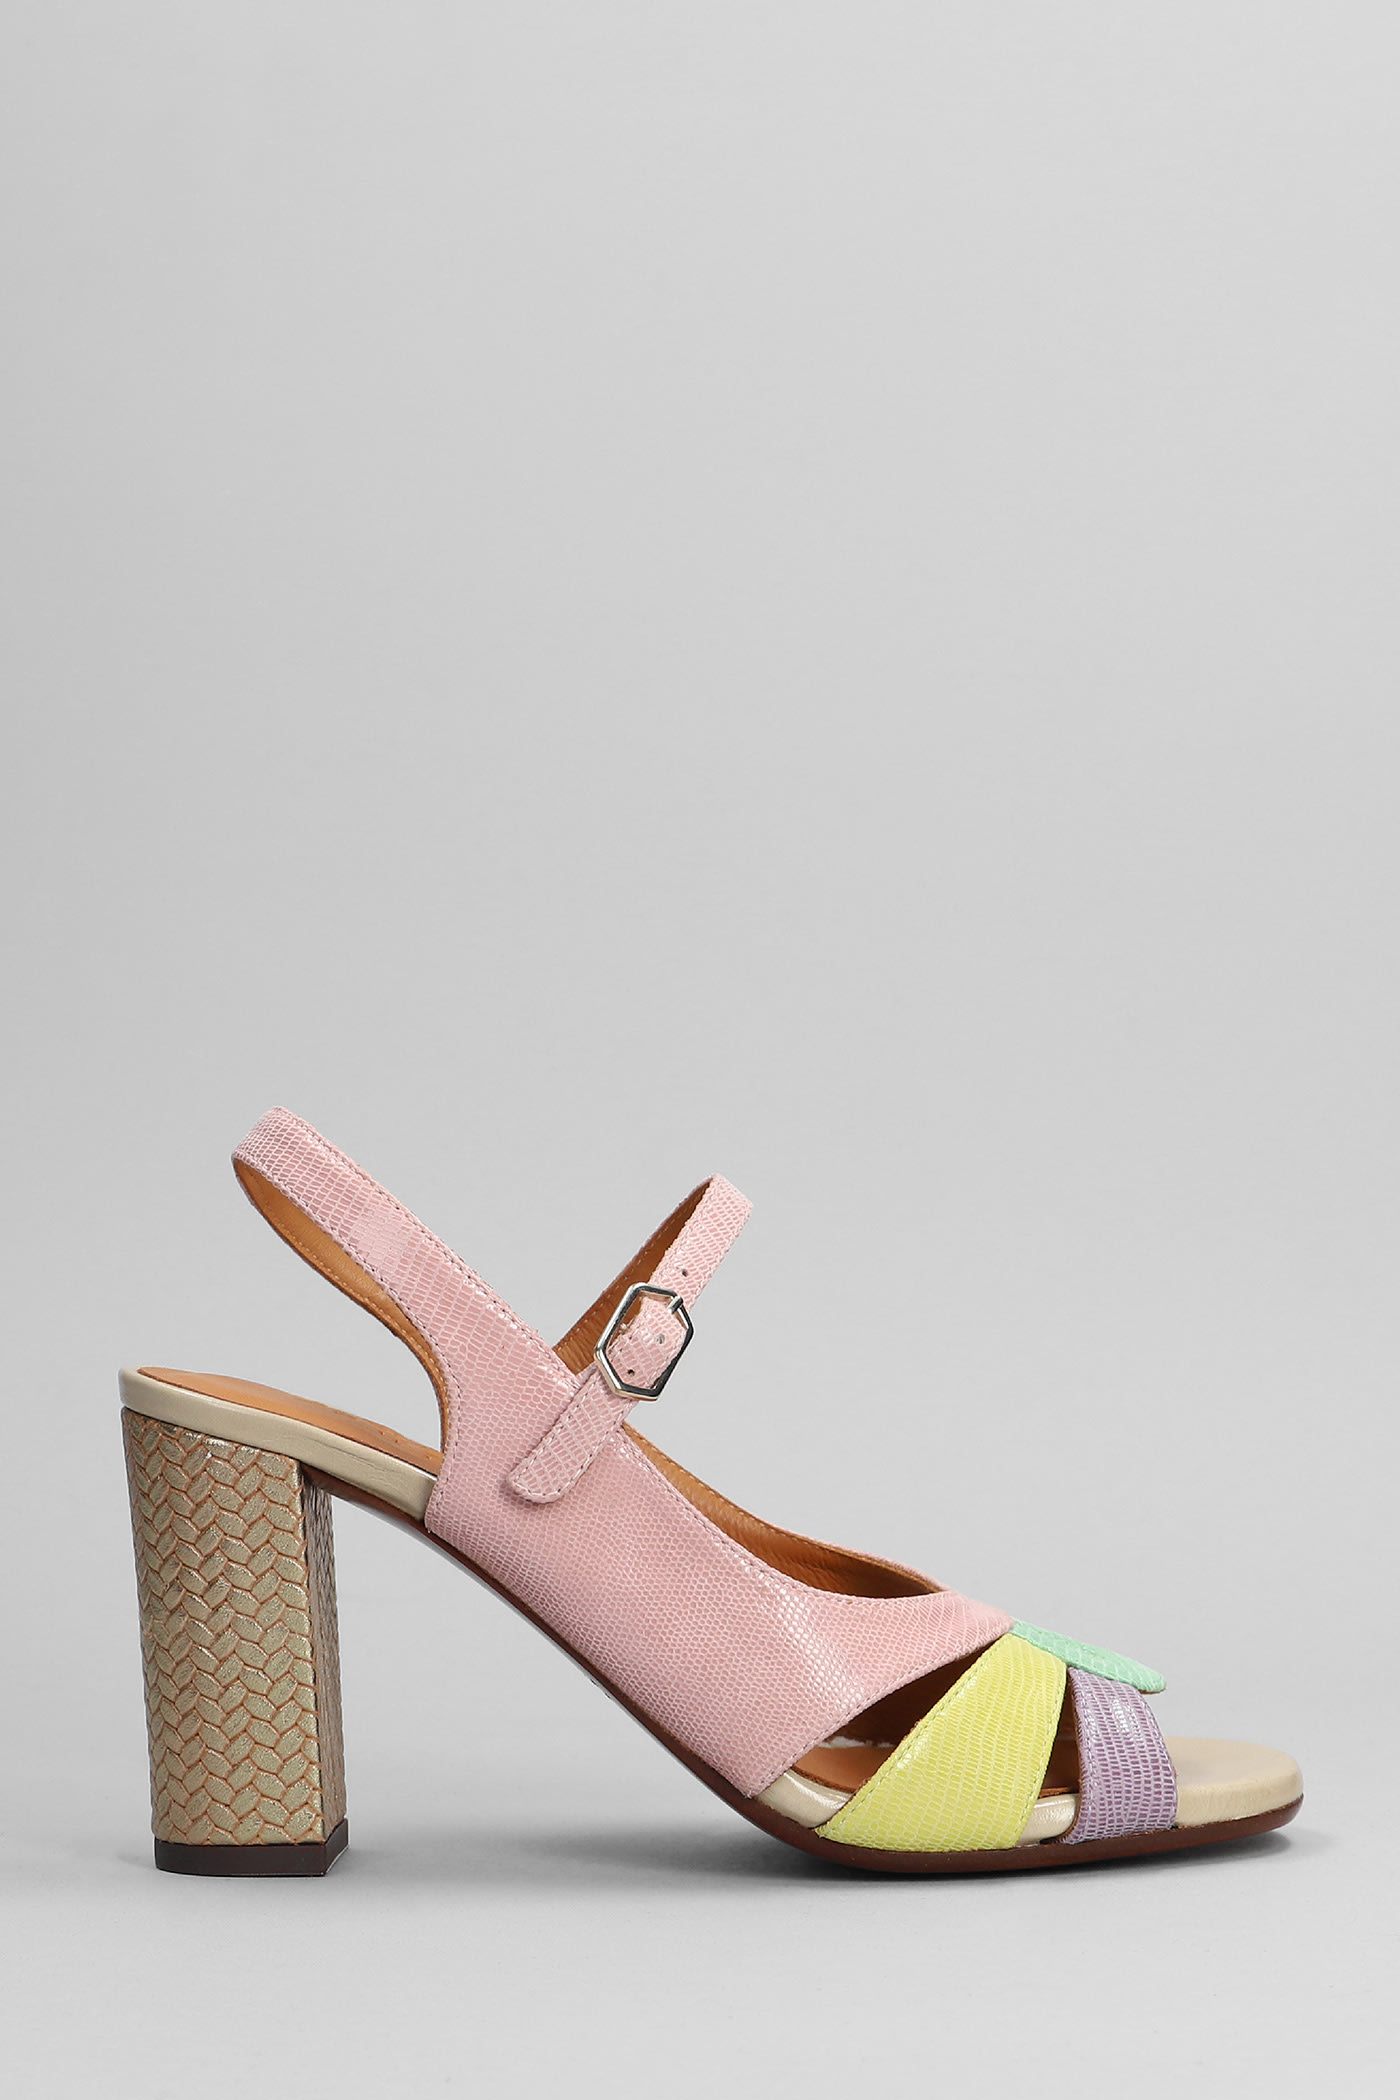 Chie Mihara Badena Sandals In Multicolor Leather